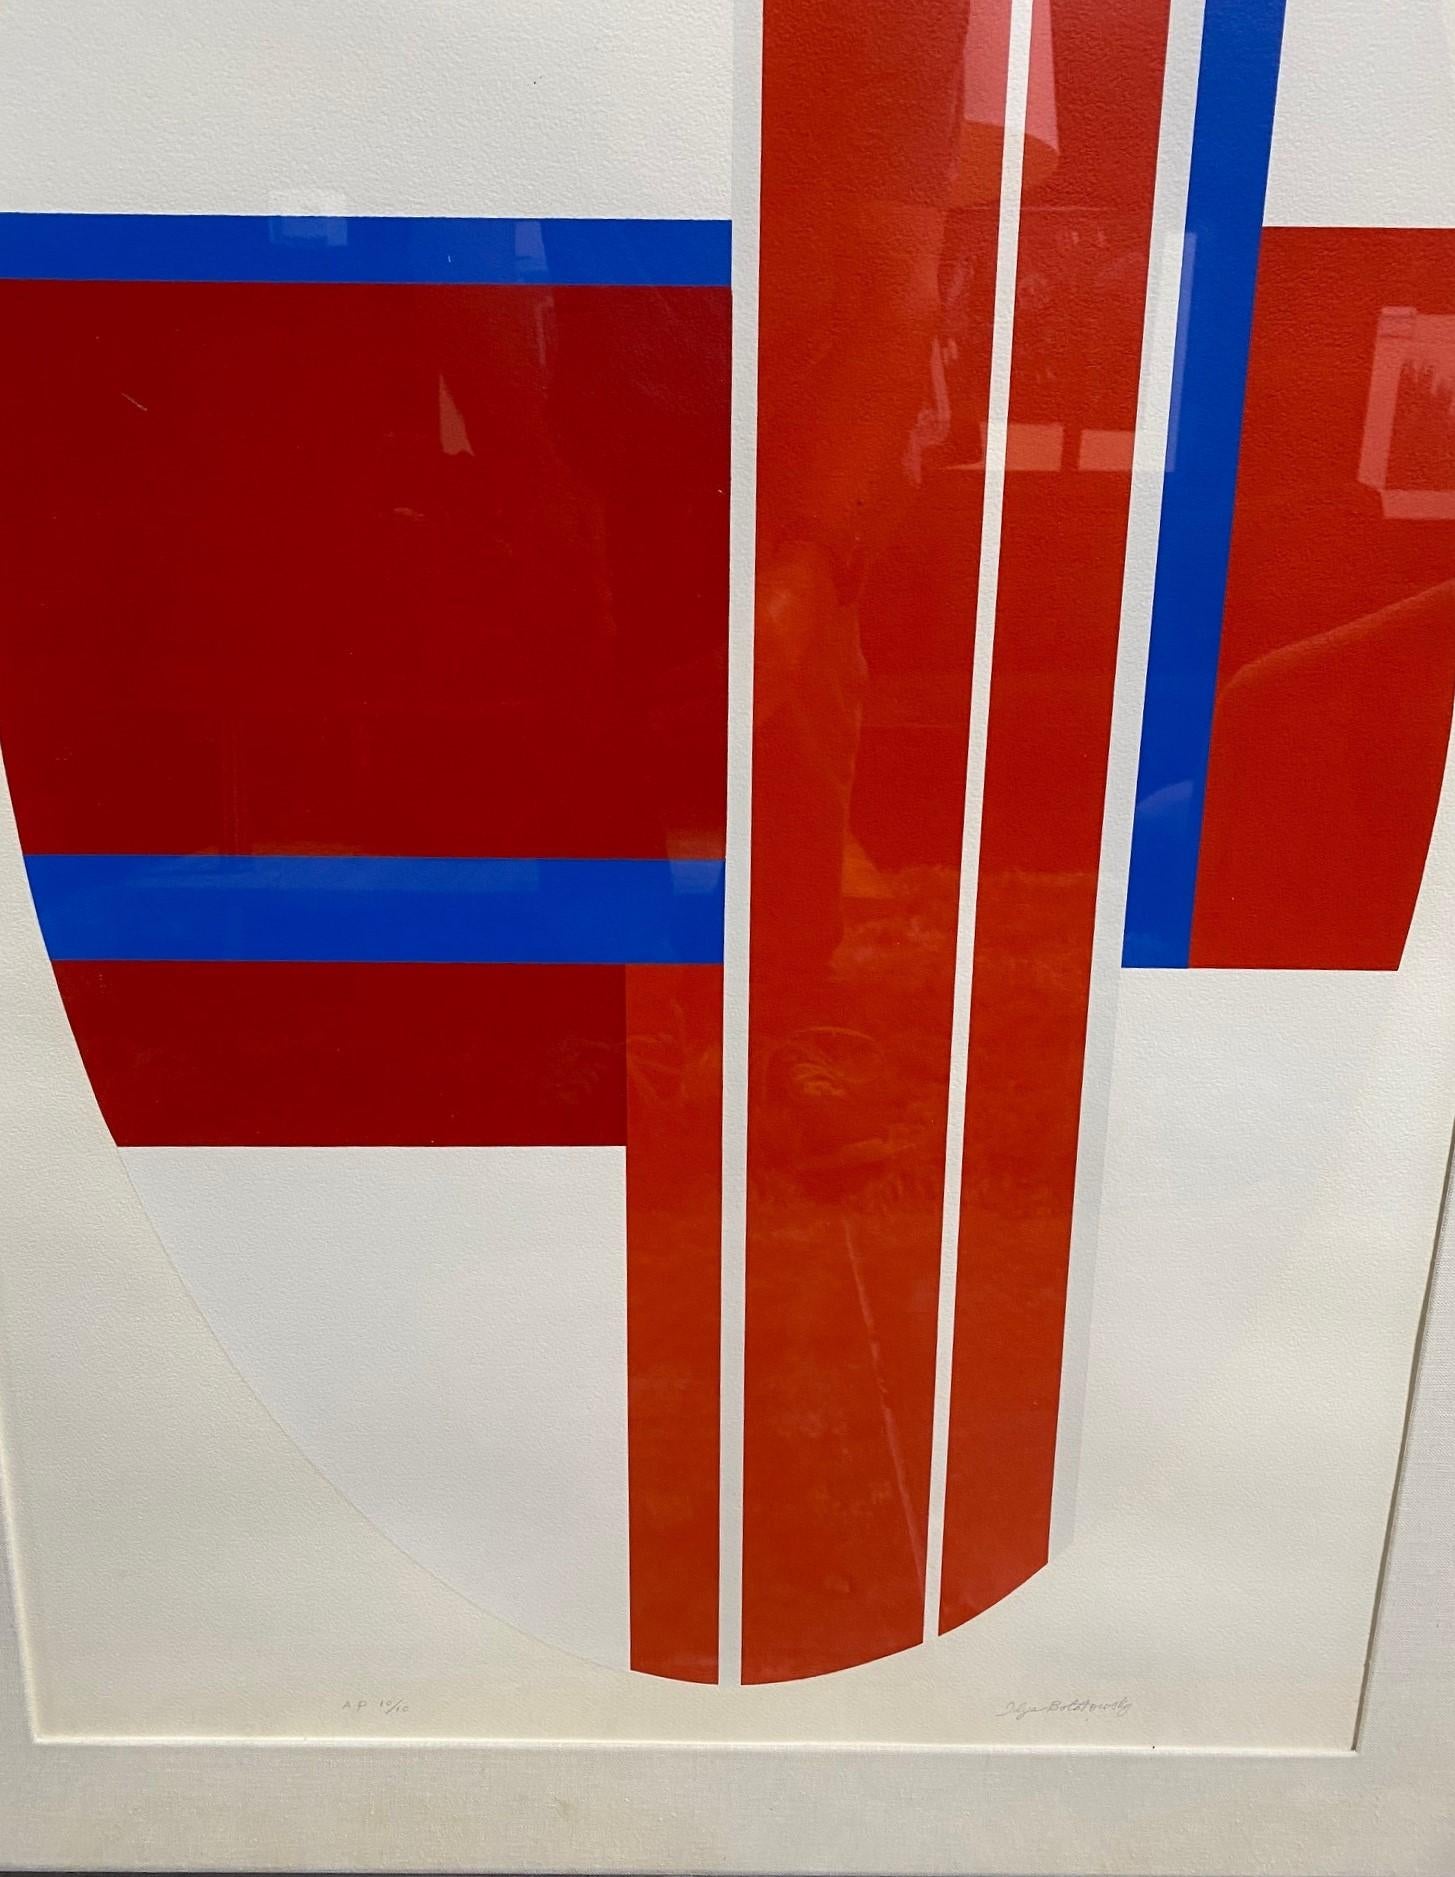 20th Century Ilya Bolotowsky Signed Limited Edition Silkscreen in Color Abstract Print Red